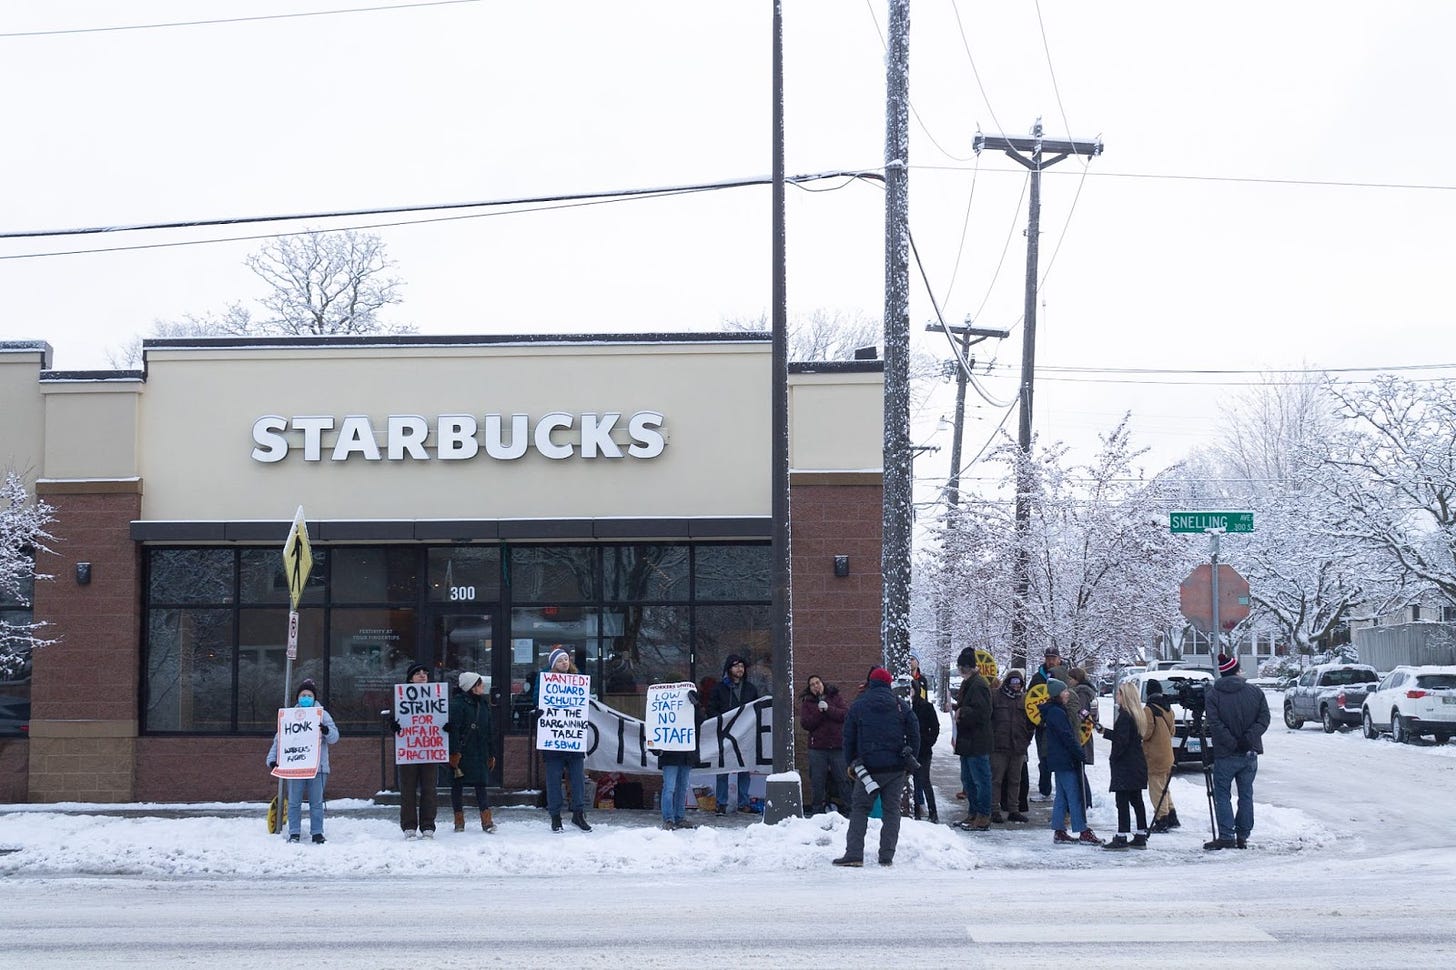 a small crowd pickets on the sidewalk in the snow in front of a starbucks location holding signs